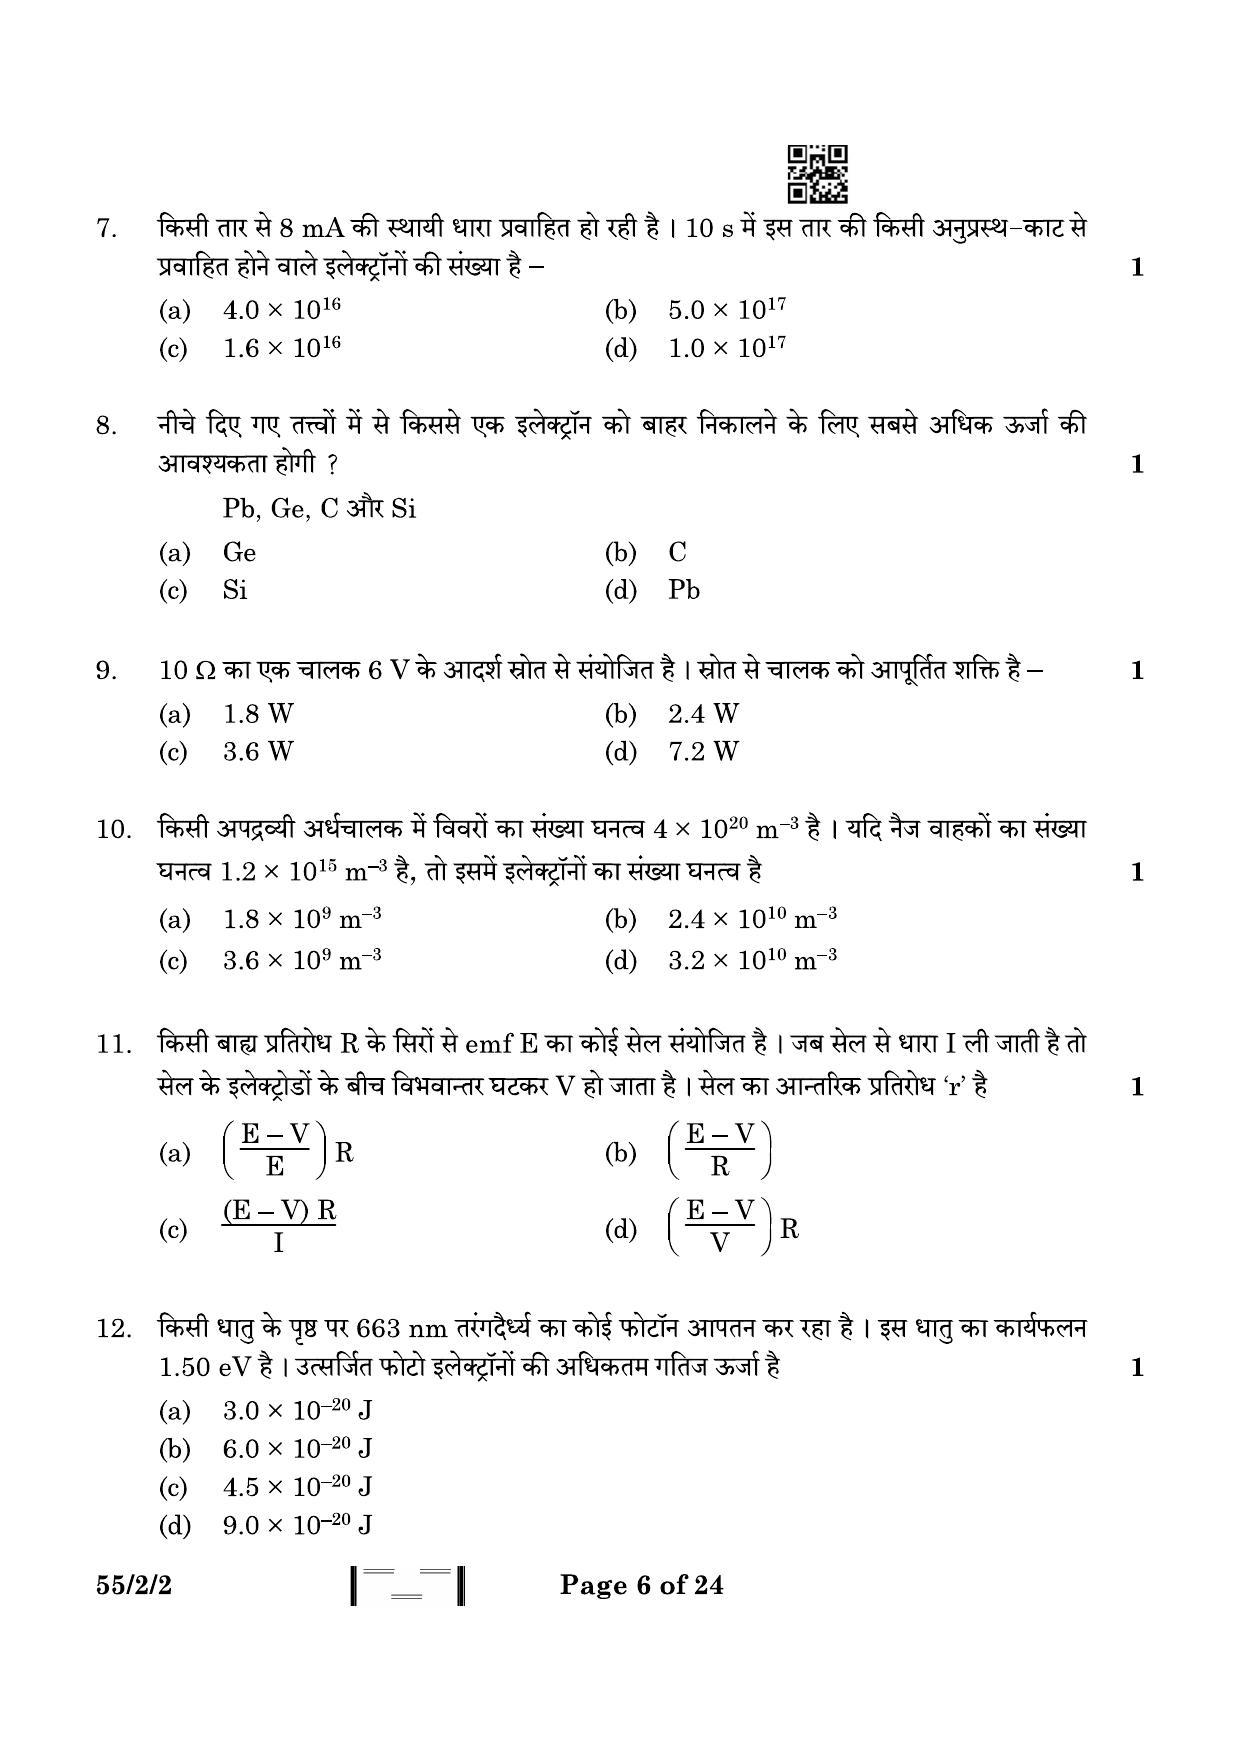 CBSE Class 12 55-2-2 Physics 2023 Question Paper - Page 6